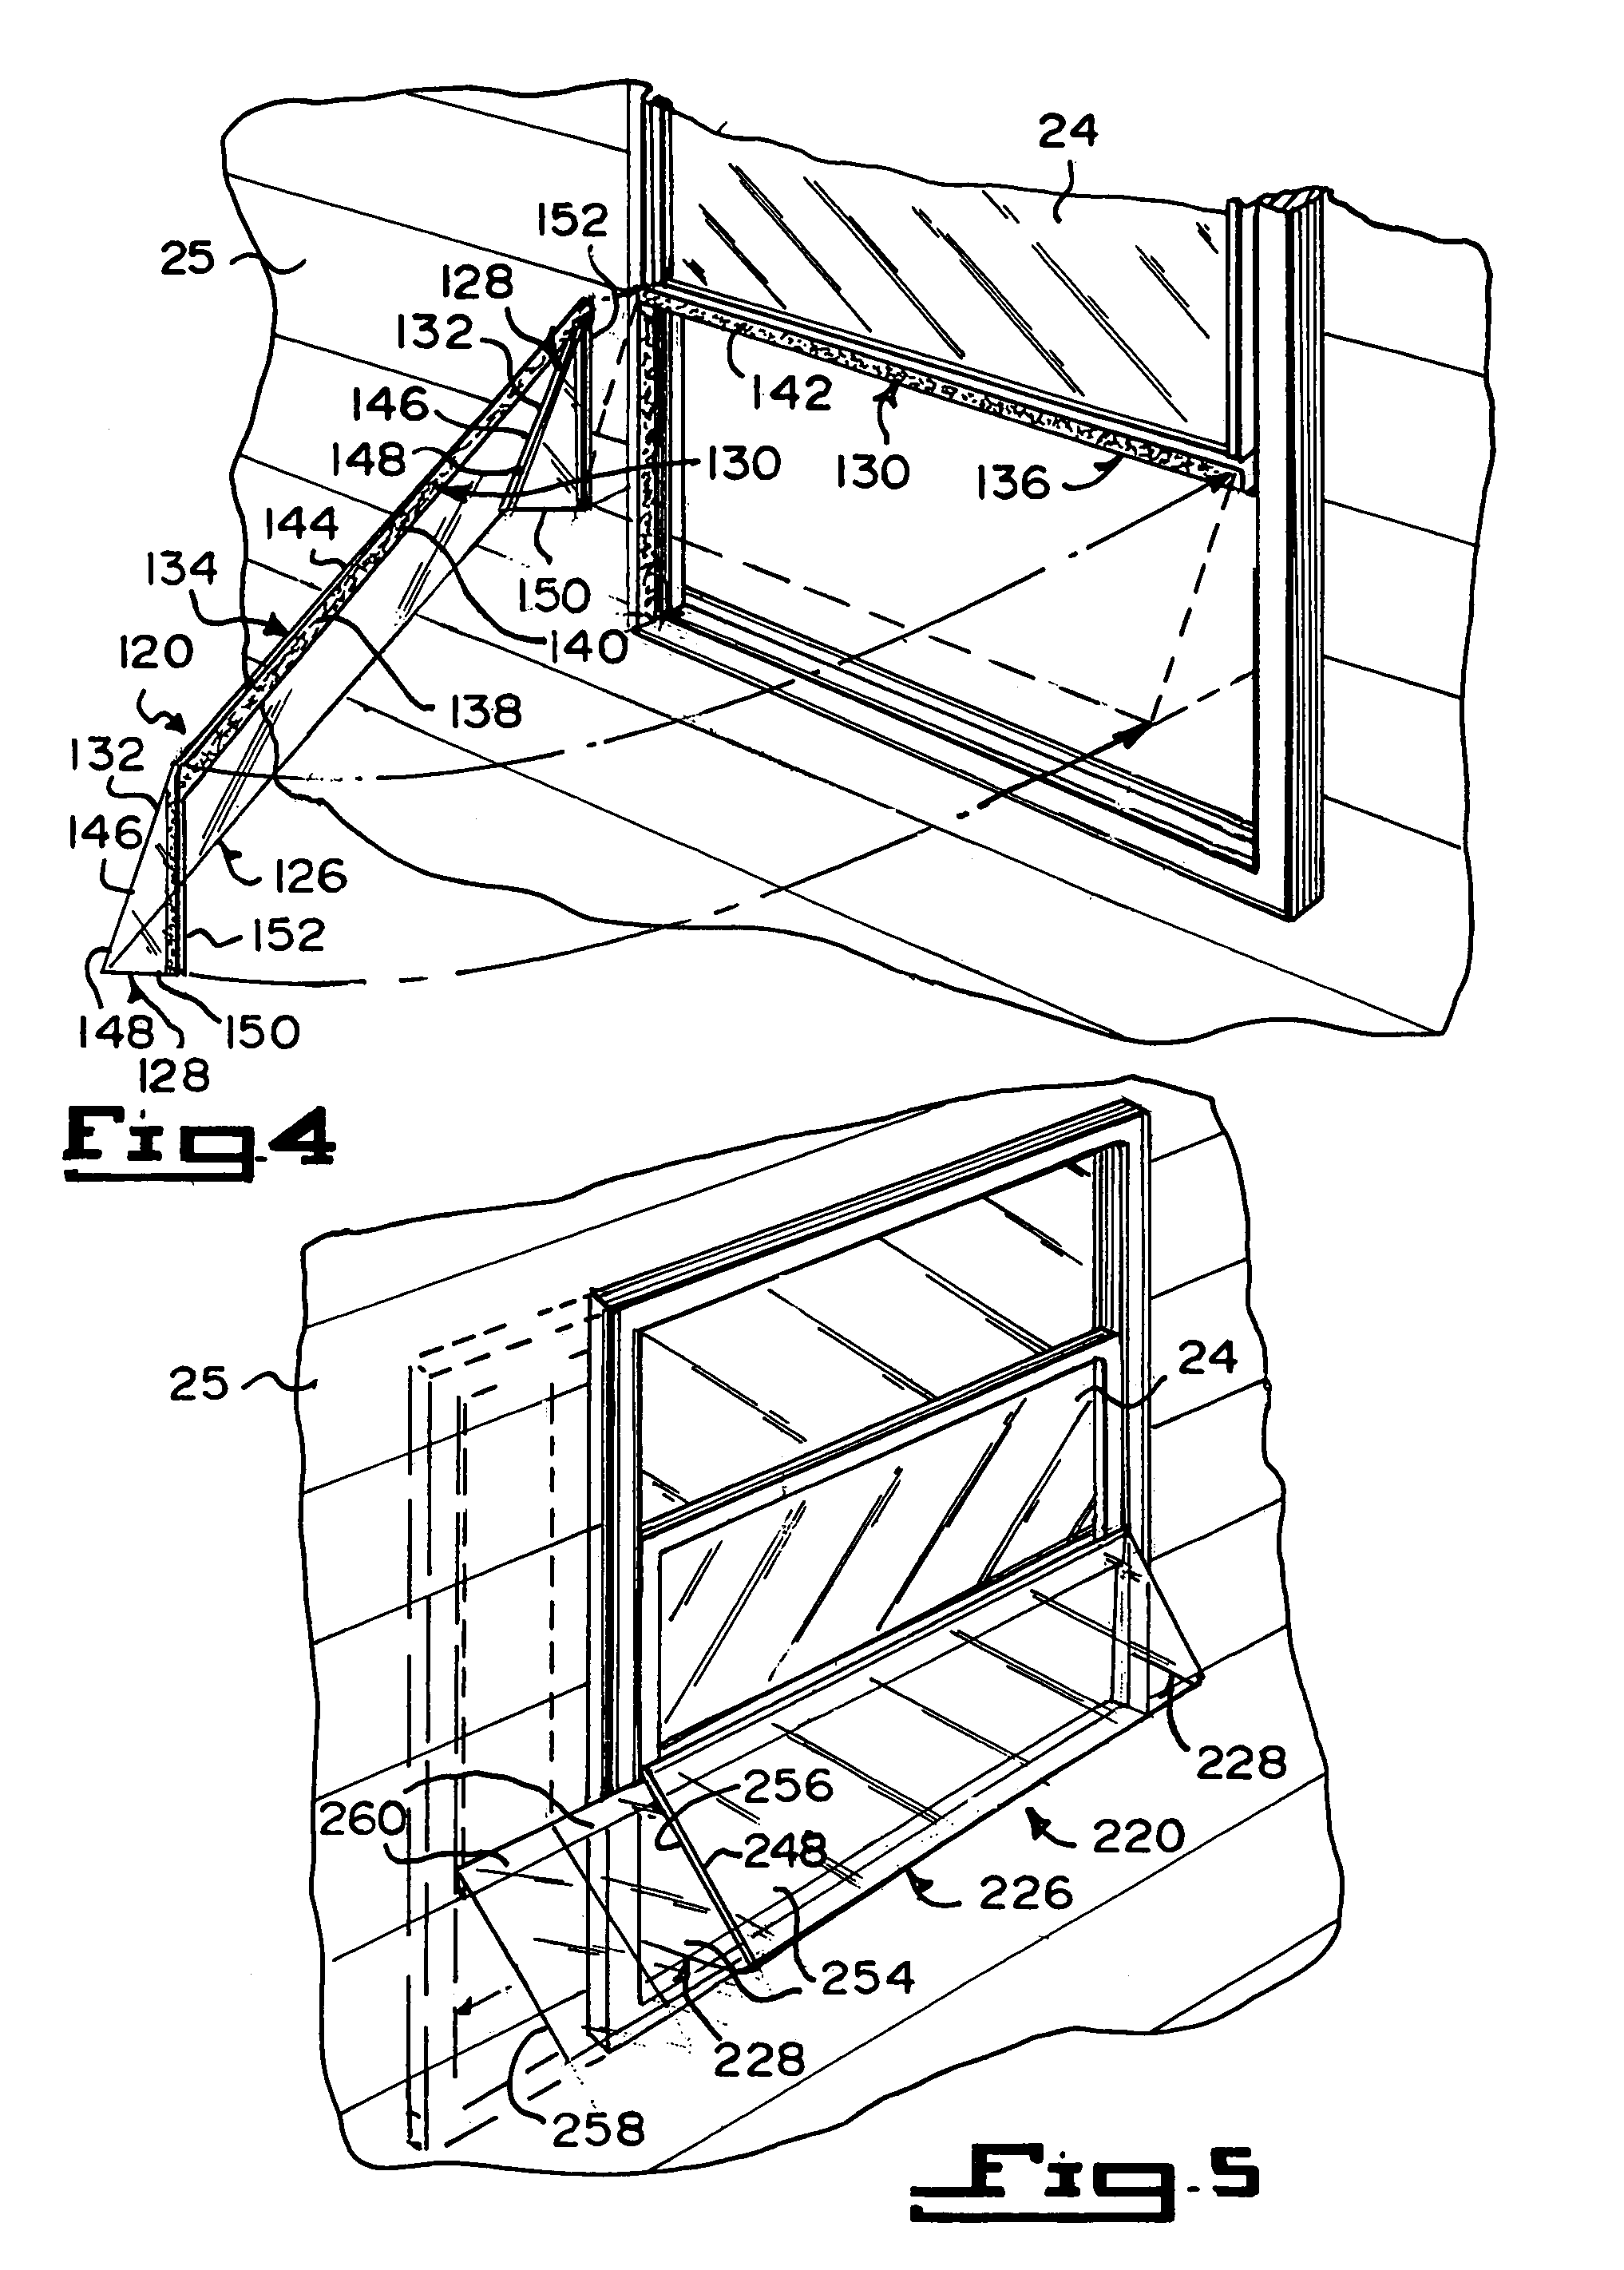 Shade for preventing rain from entering an open double hung window of any width